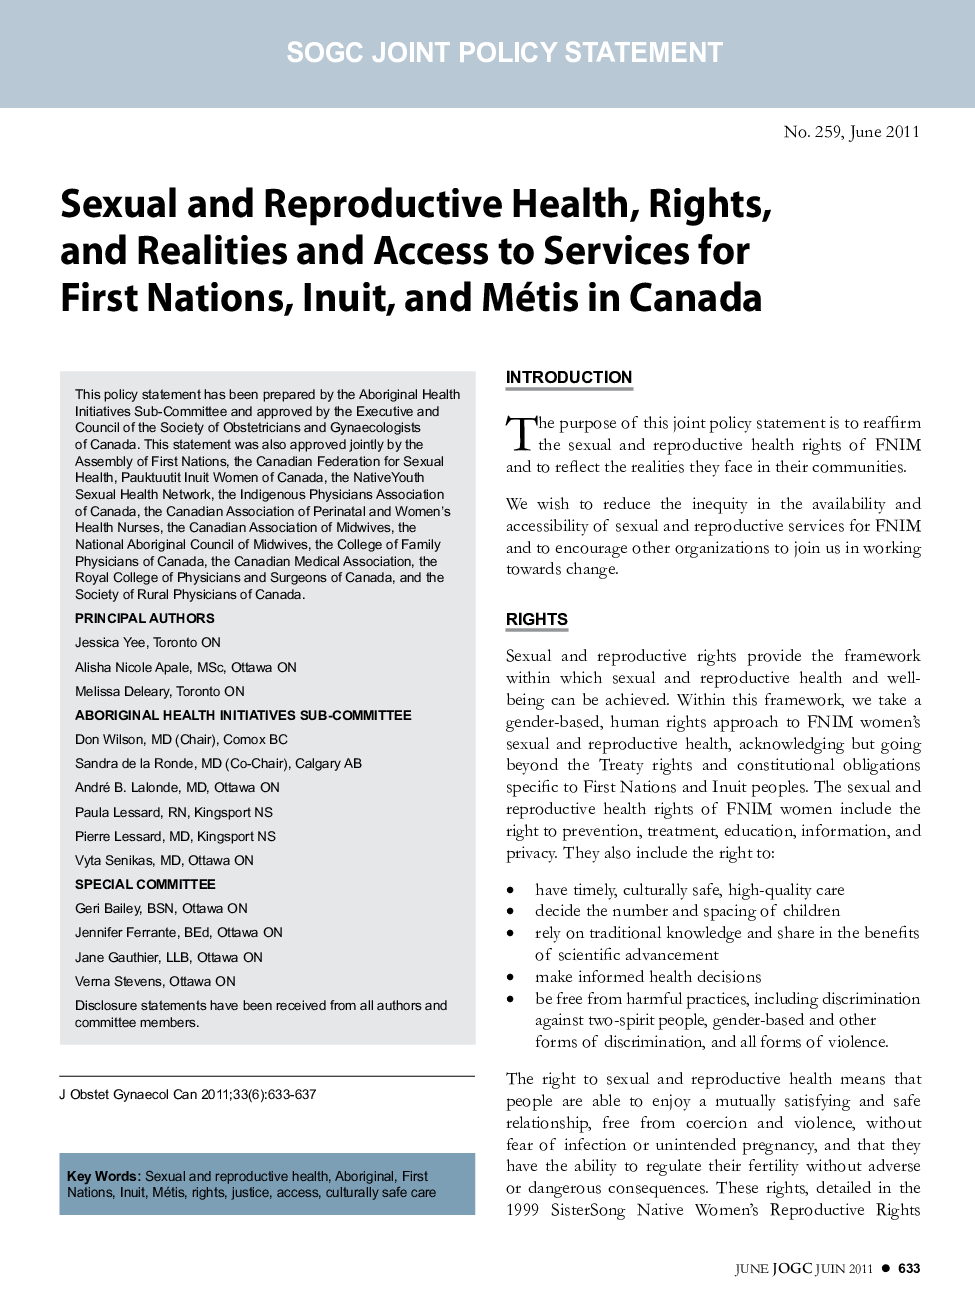 Sexual and Reproductive Health, Rights, and Realities and Access to Services for First Nations, Inuit, and Métis in Canada